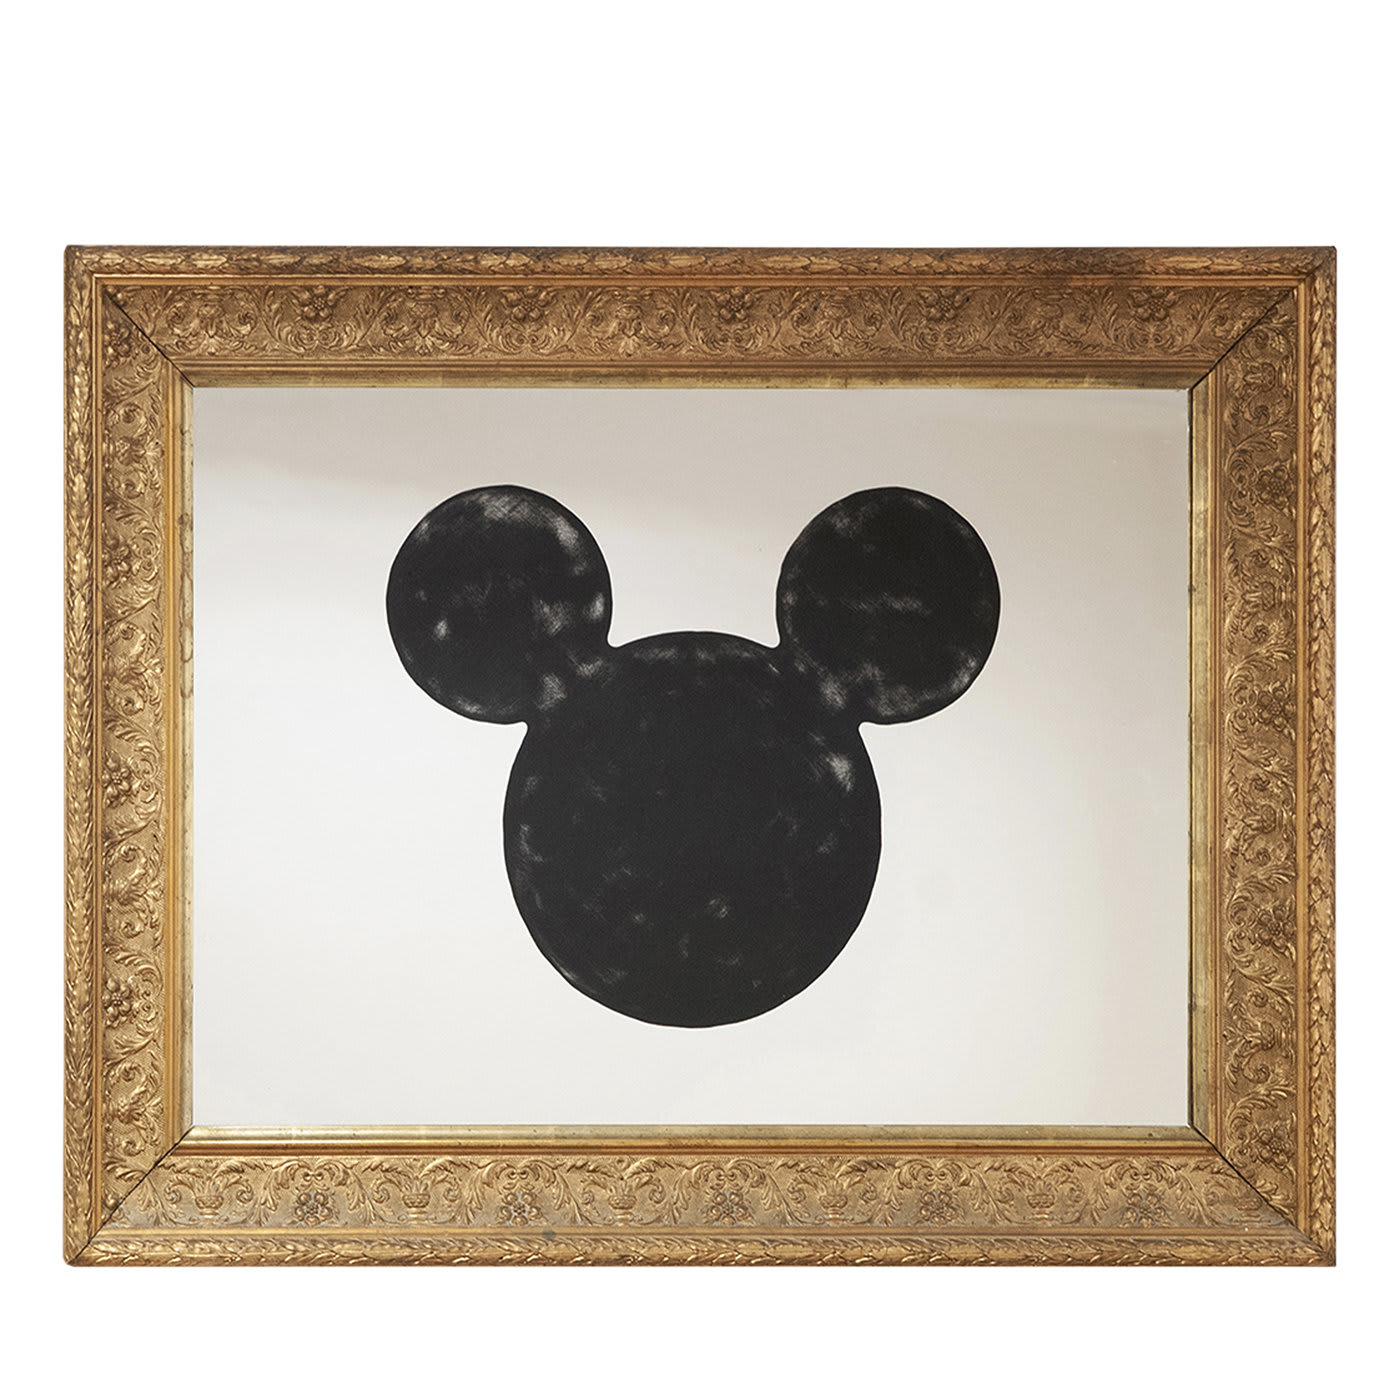 mickey mouse hand mirror